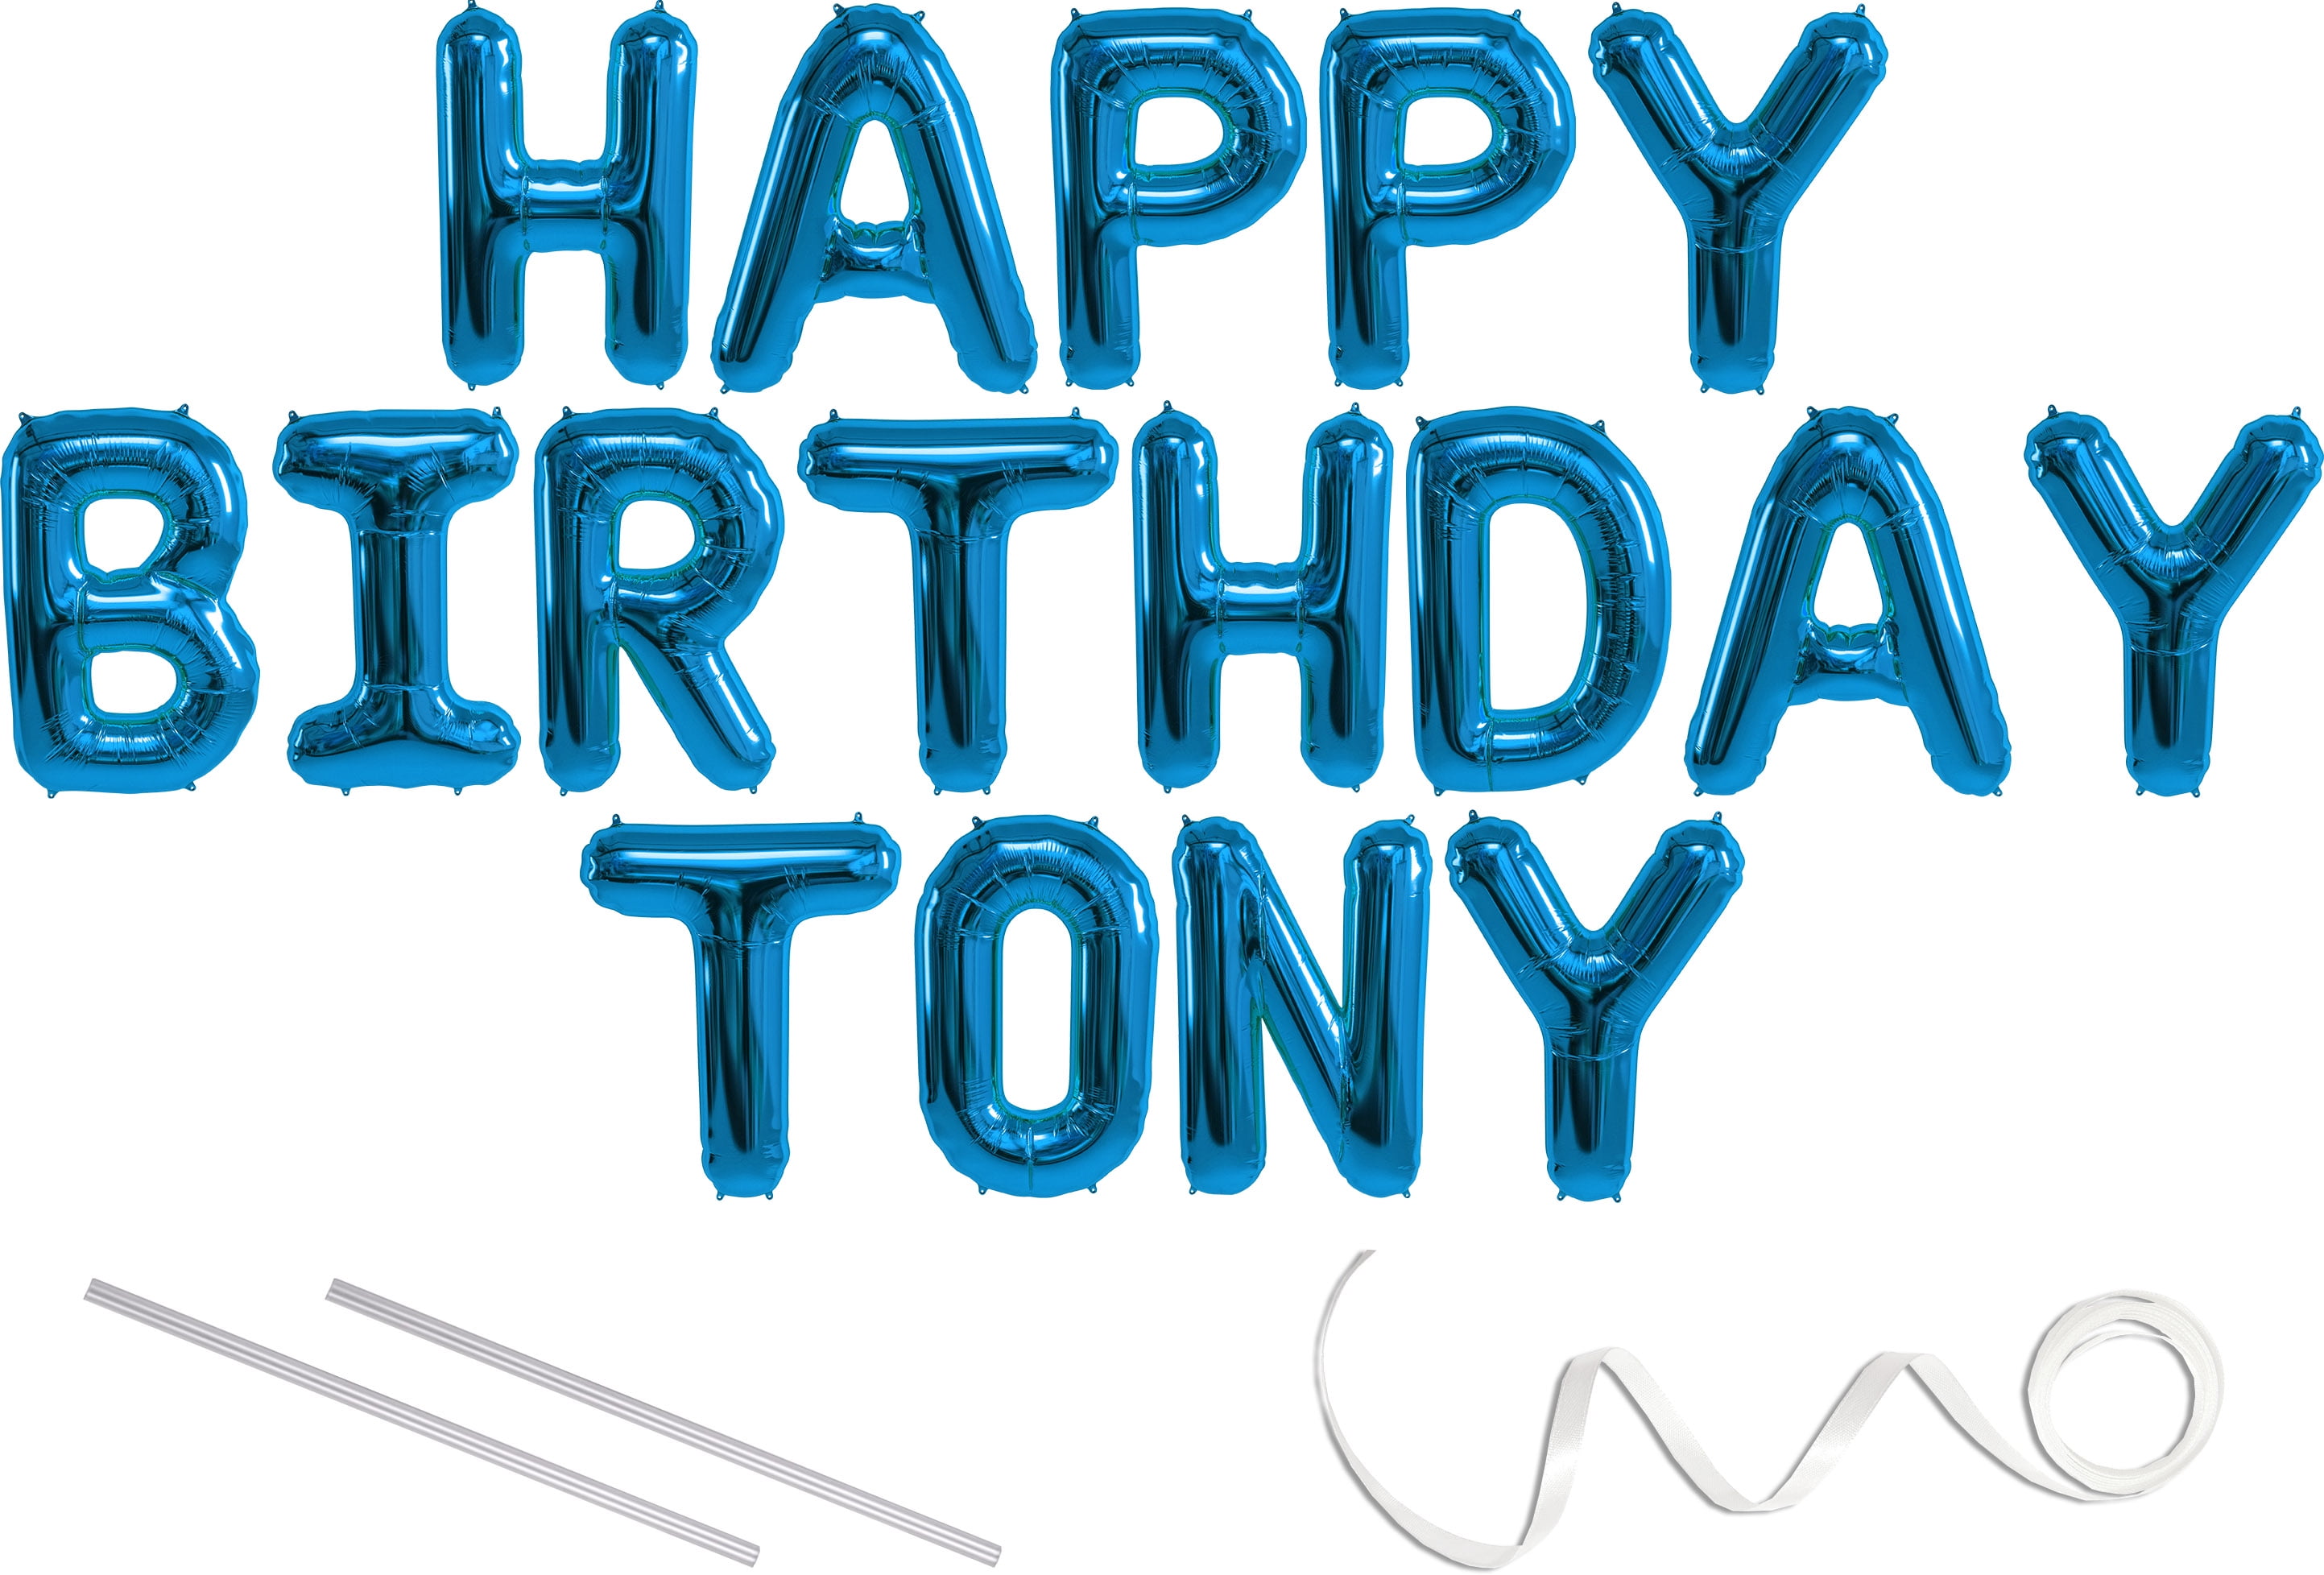 Tony Happy Birthday Mylar Balloon Banner Blue 16 Inch Letters Includes 2 Straws For Inflating String For Hanging Air Fill Only Does Not Float W Helium Great Birthday Decoration Walmart Com Walmart Com